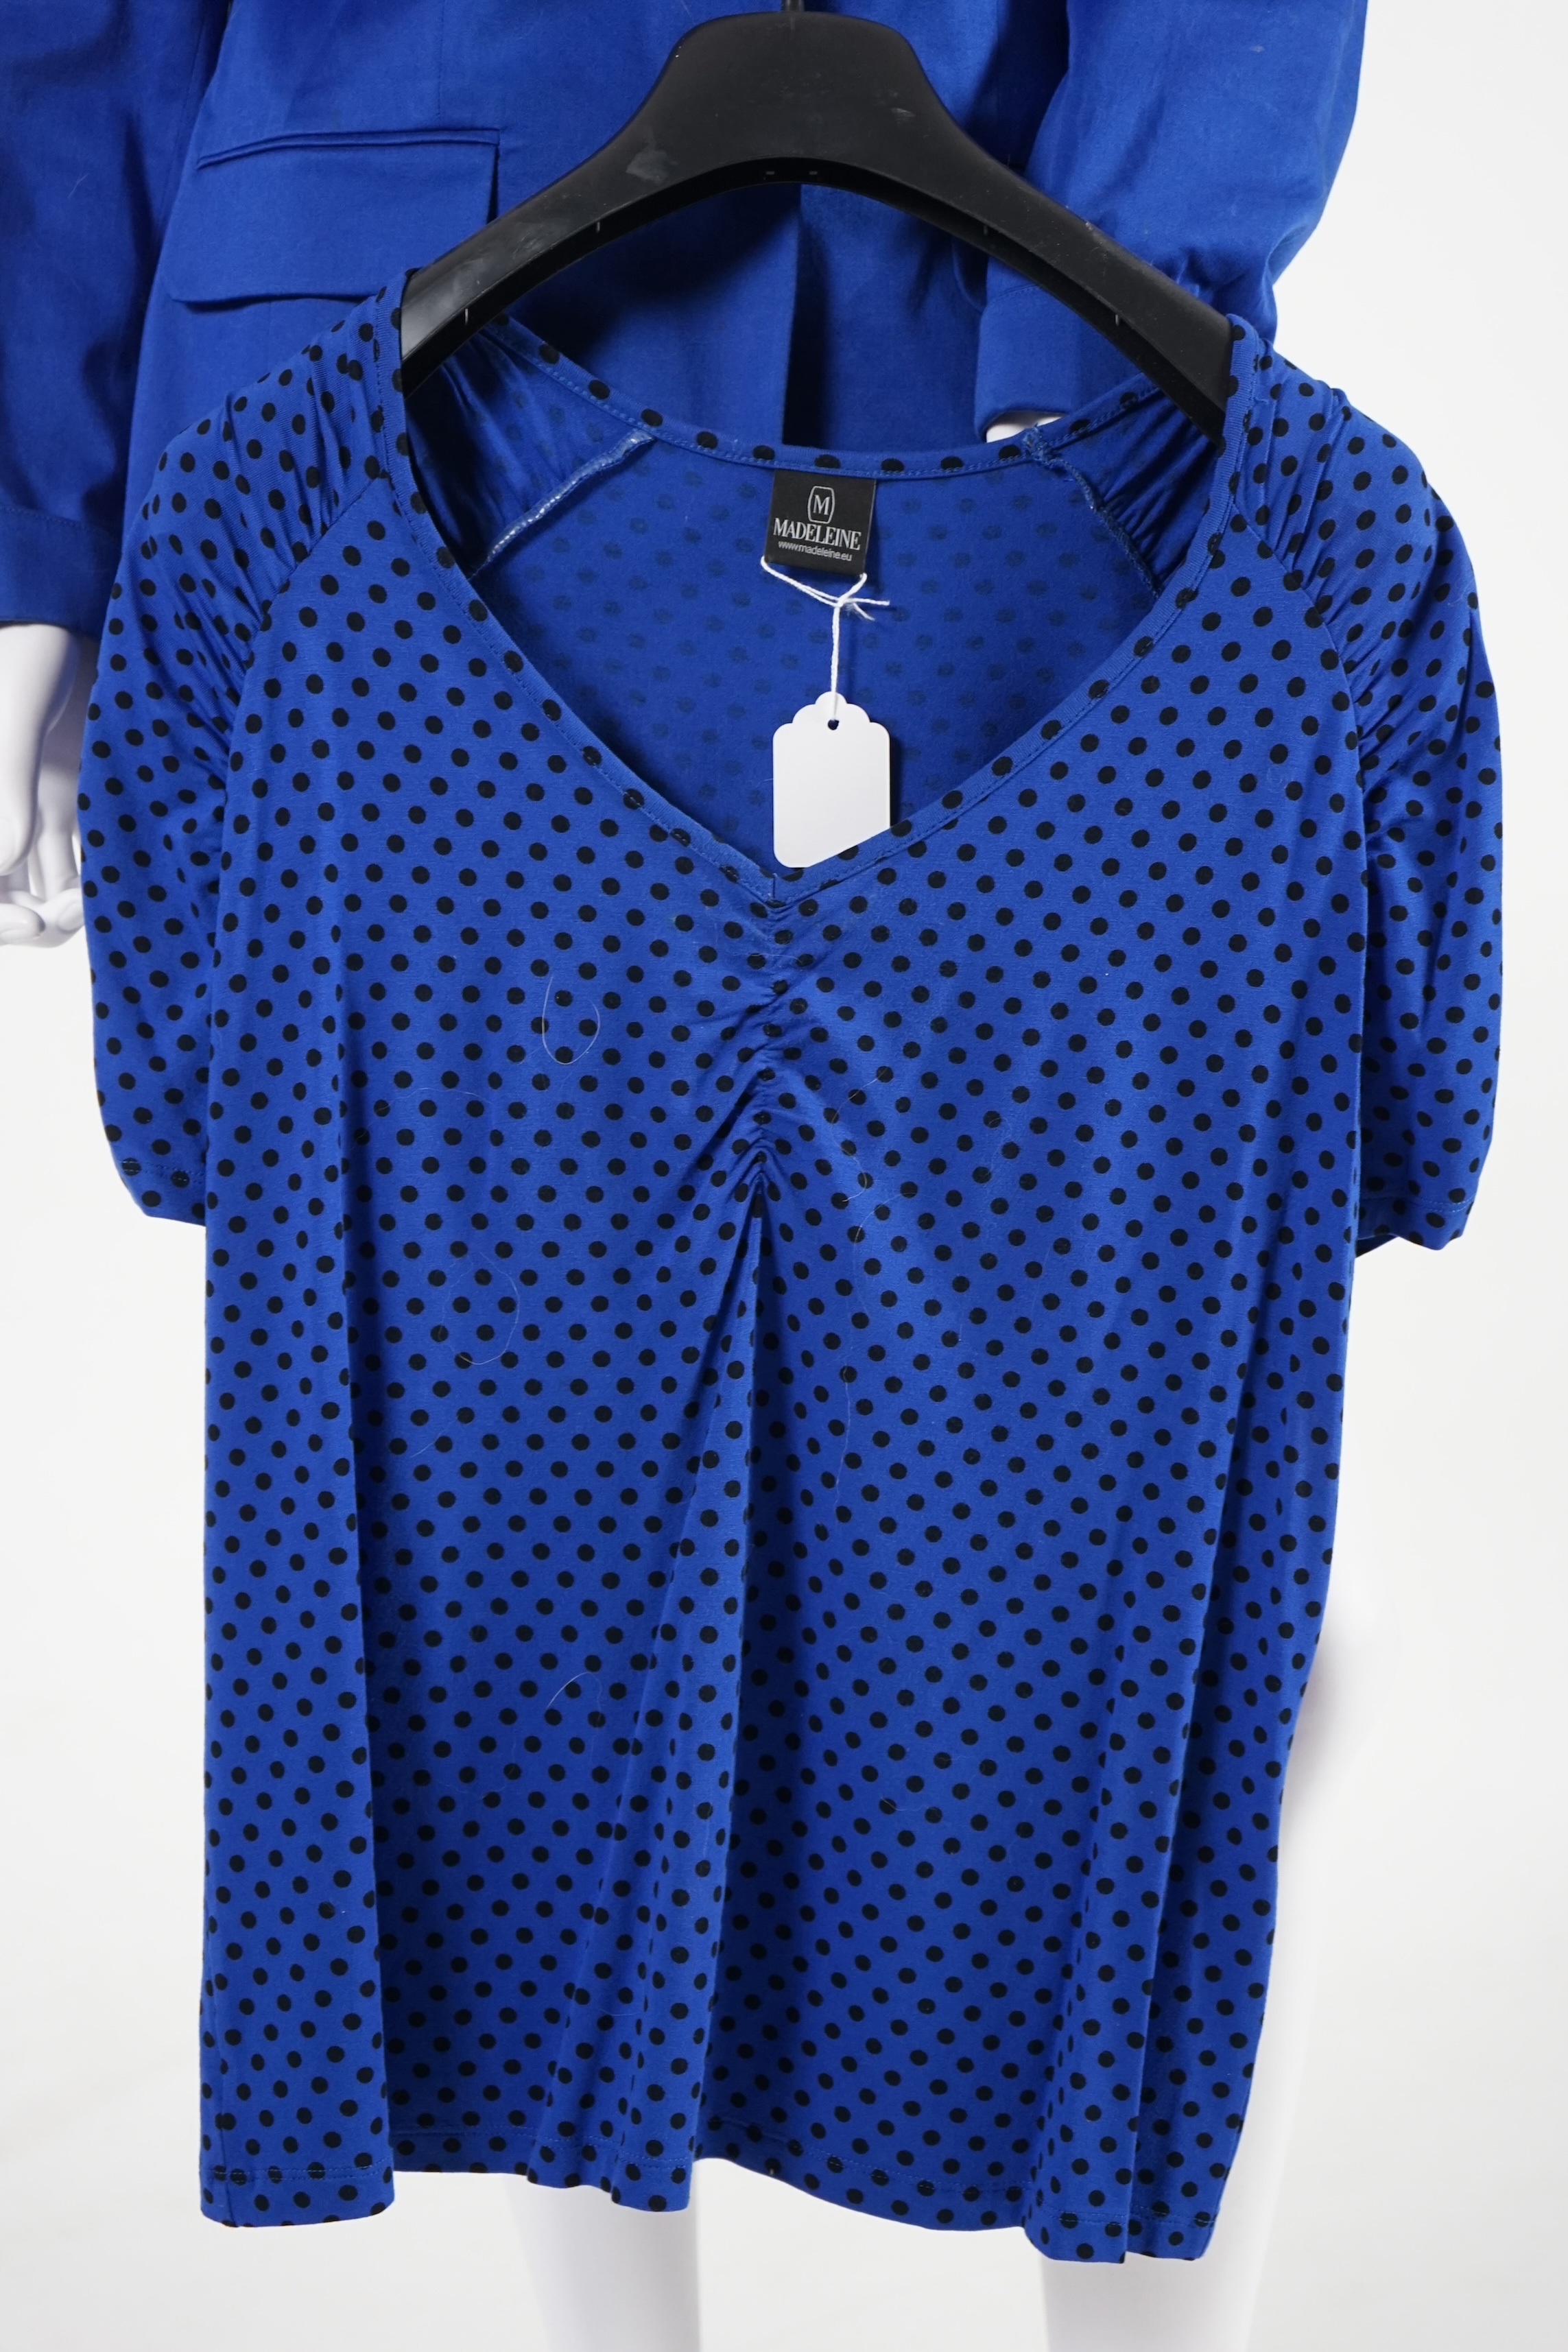 A Madeleine lady's royal blue jacket, polka dot t-shirt and matching jean style trousers, Sizes 14-16 Proceeds to Happy Paws Puppy Rescue